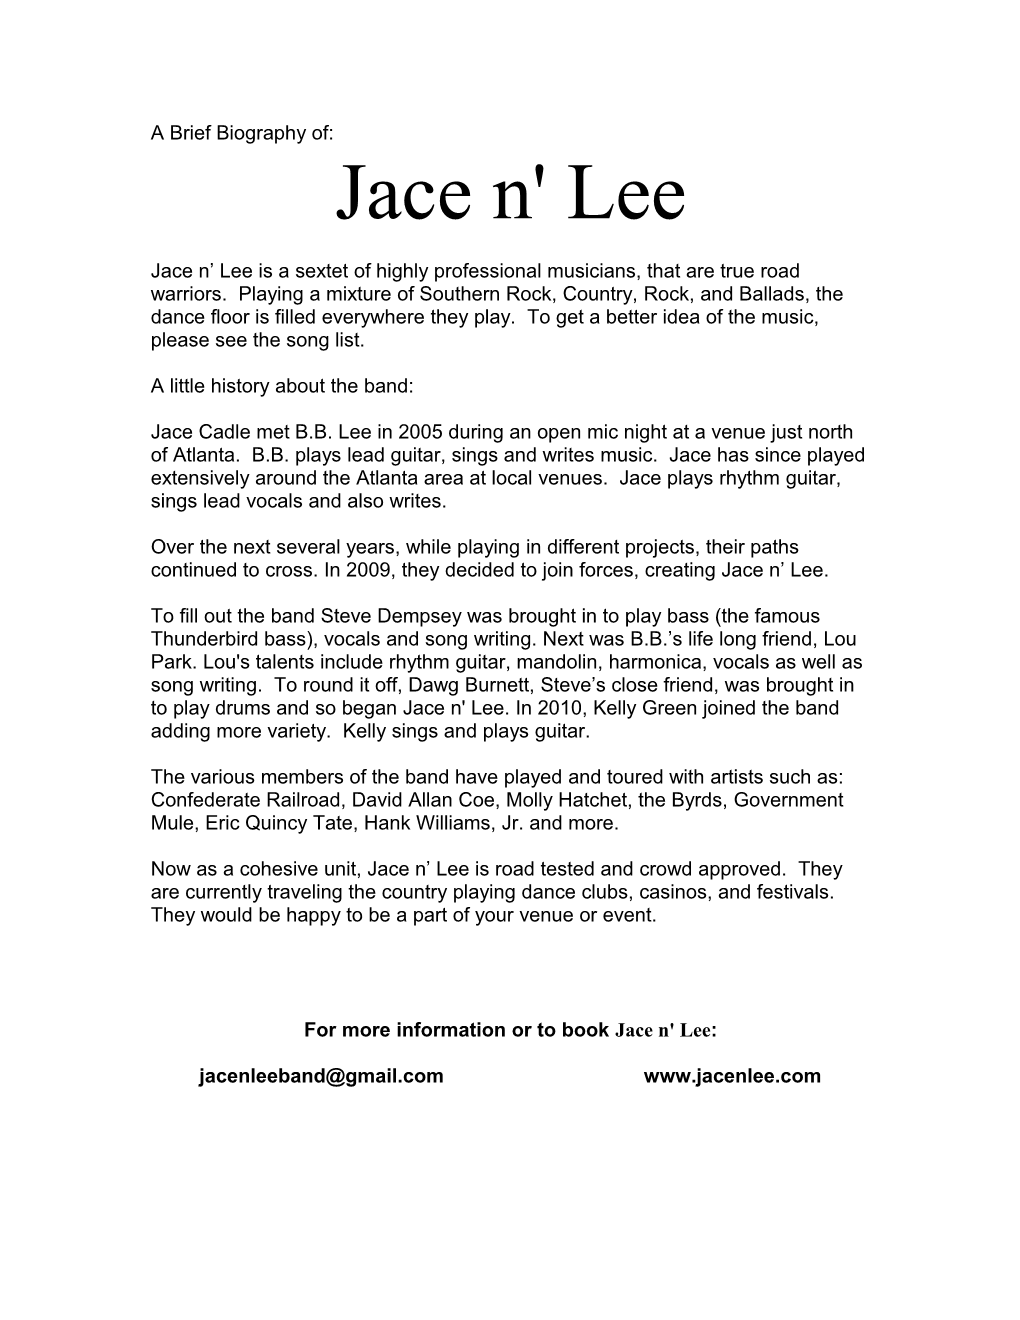 Jace N Lee Is a Quintet of Highly Professional Musicians, That Are True Road Warriors